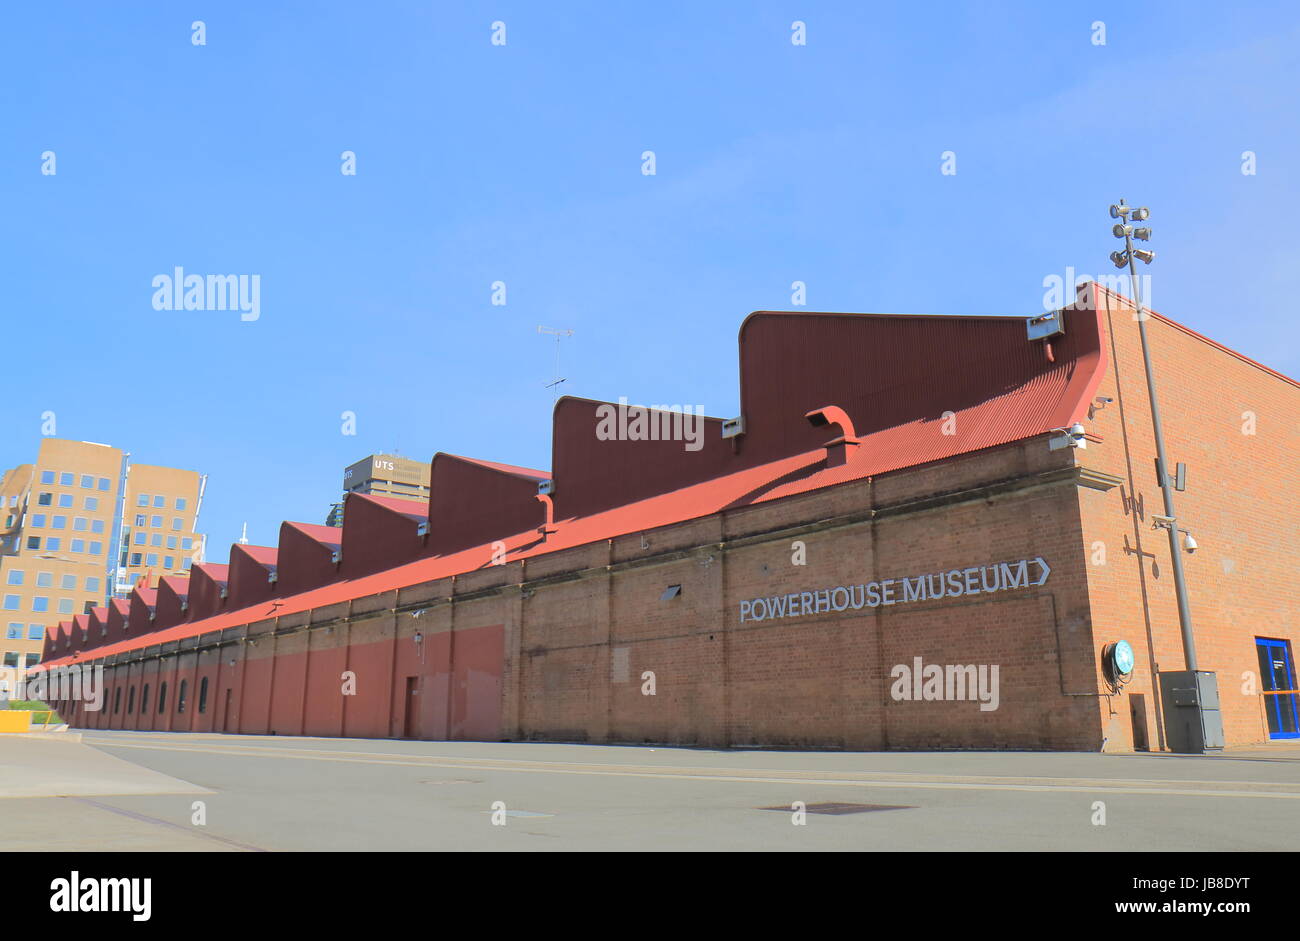 Powerhouse museum in Sydney Australia. Powerhouse museum is the major branch of the Museum of Applied Arts & Sciences in Sydney. Stock Photo